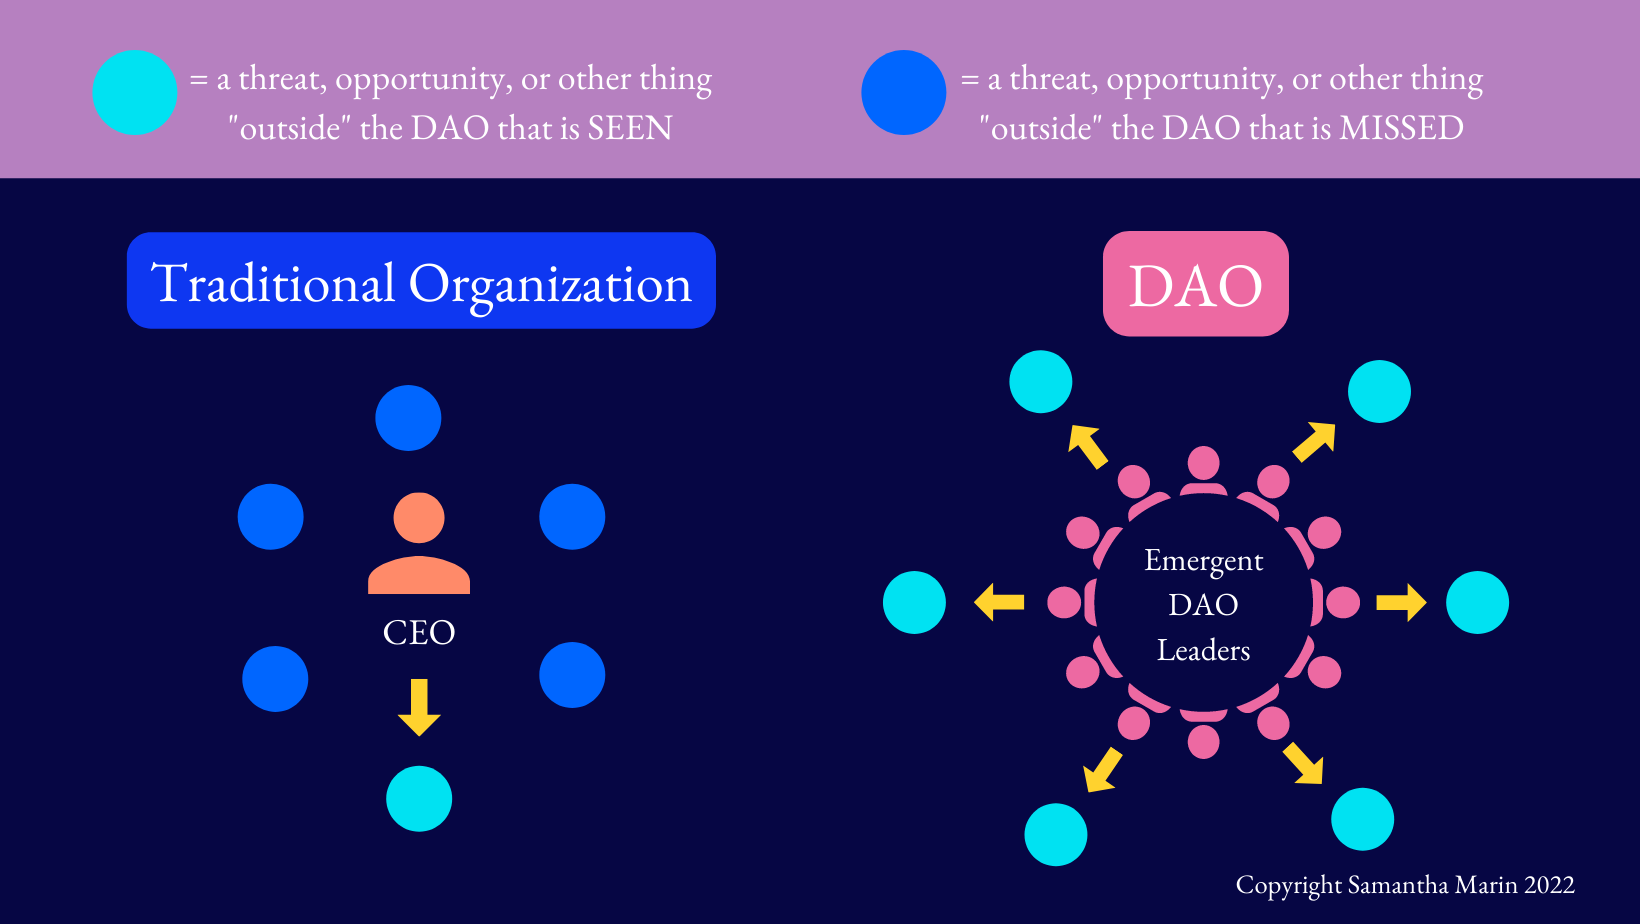 DAOs can spot more threats and opportunities because the leaders have diverse viewpoints.